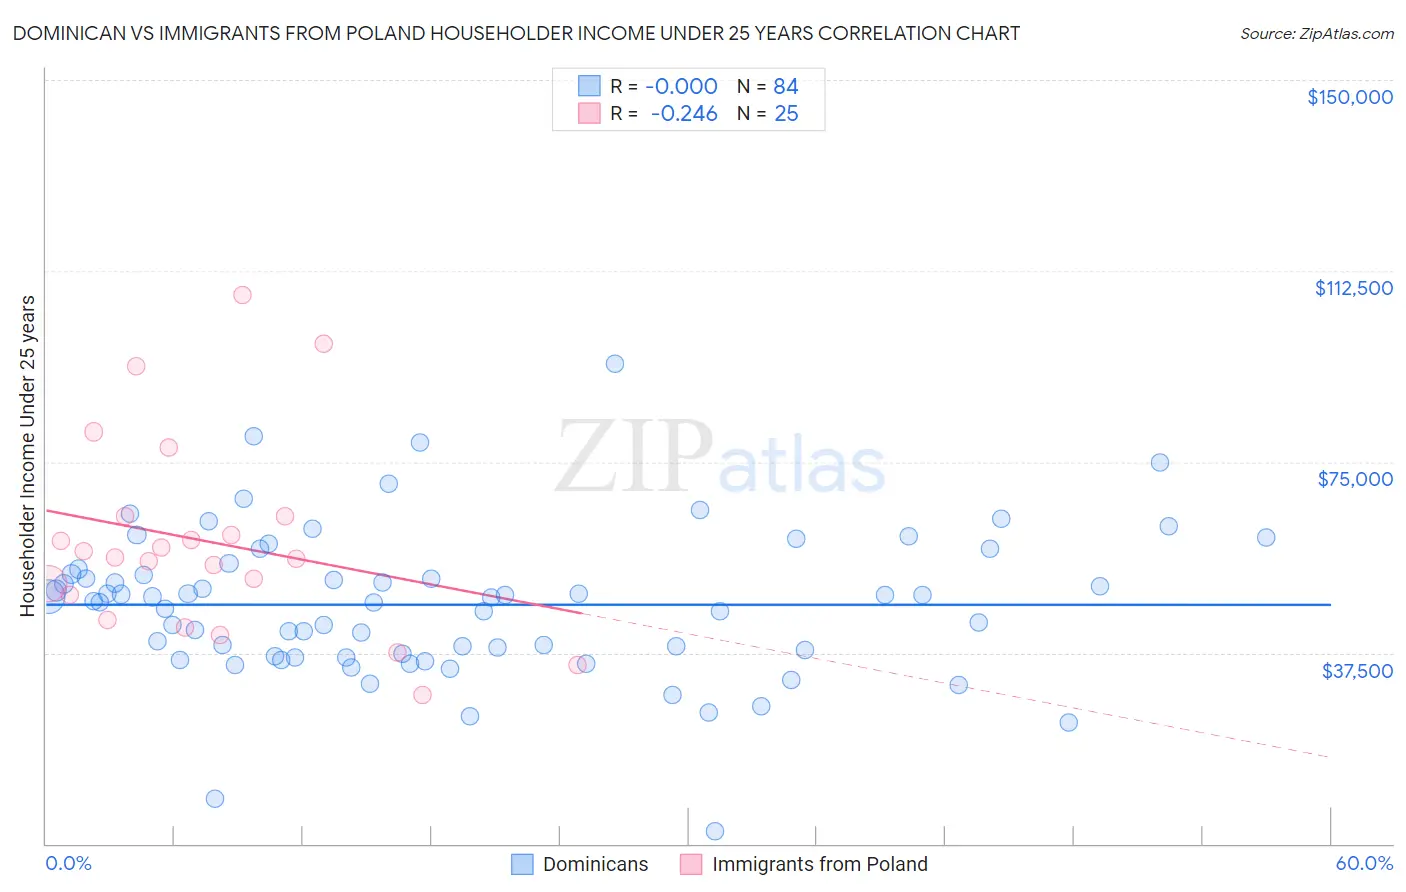 Dominican vs Immigrants from Poland Householder Income Under 25 years